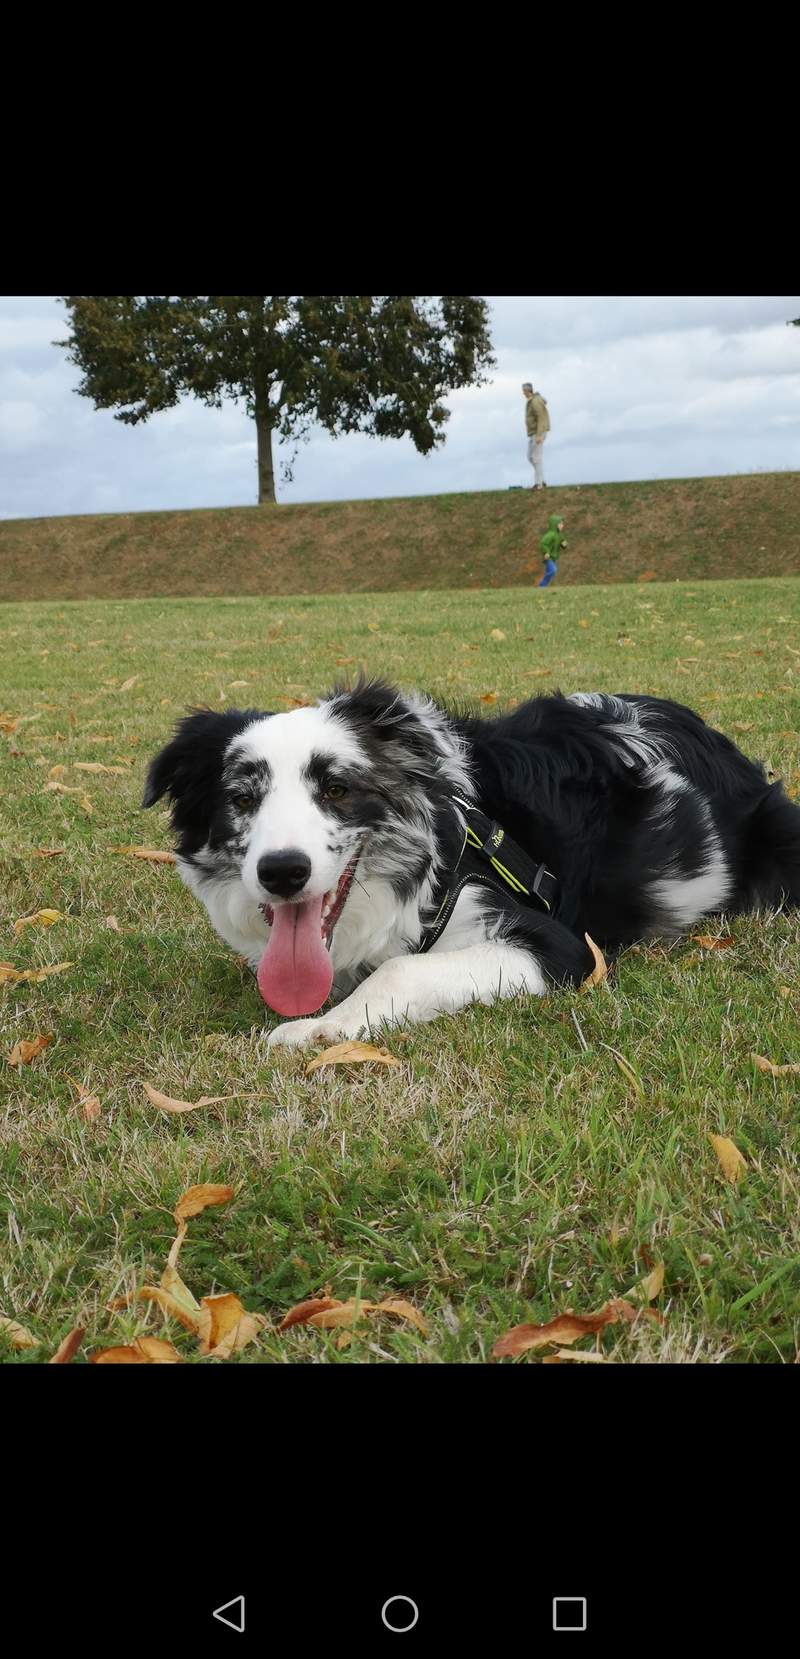 a black and white dog lying on some grass in a field